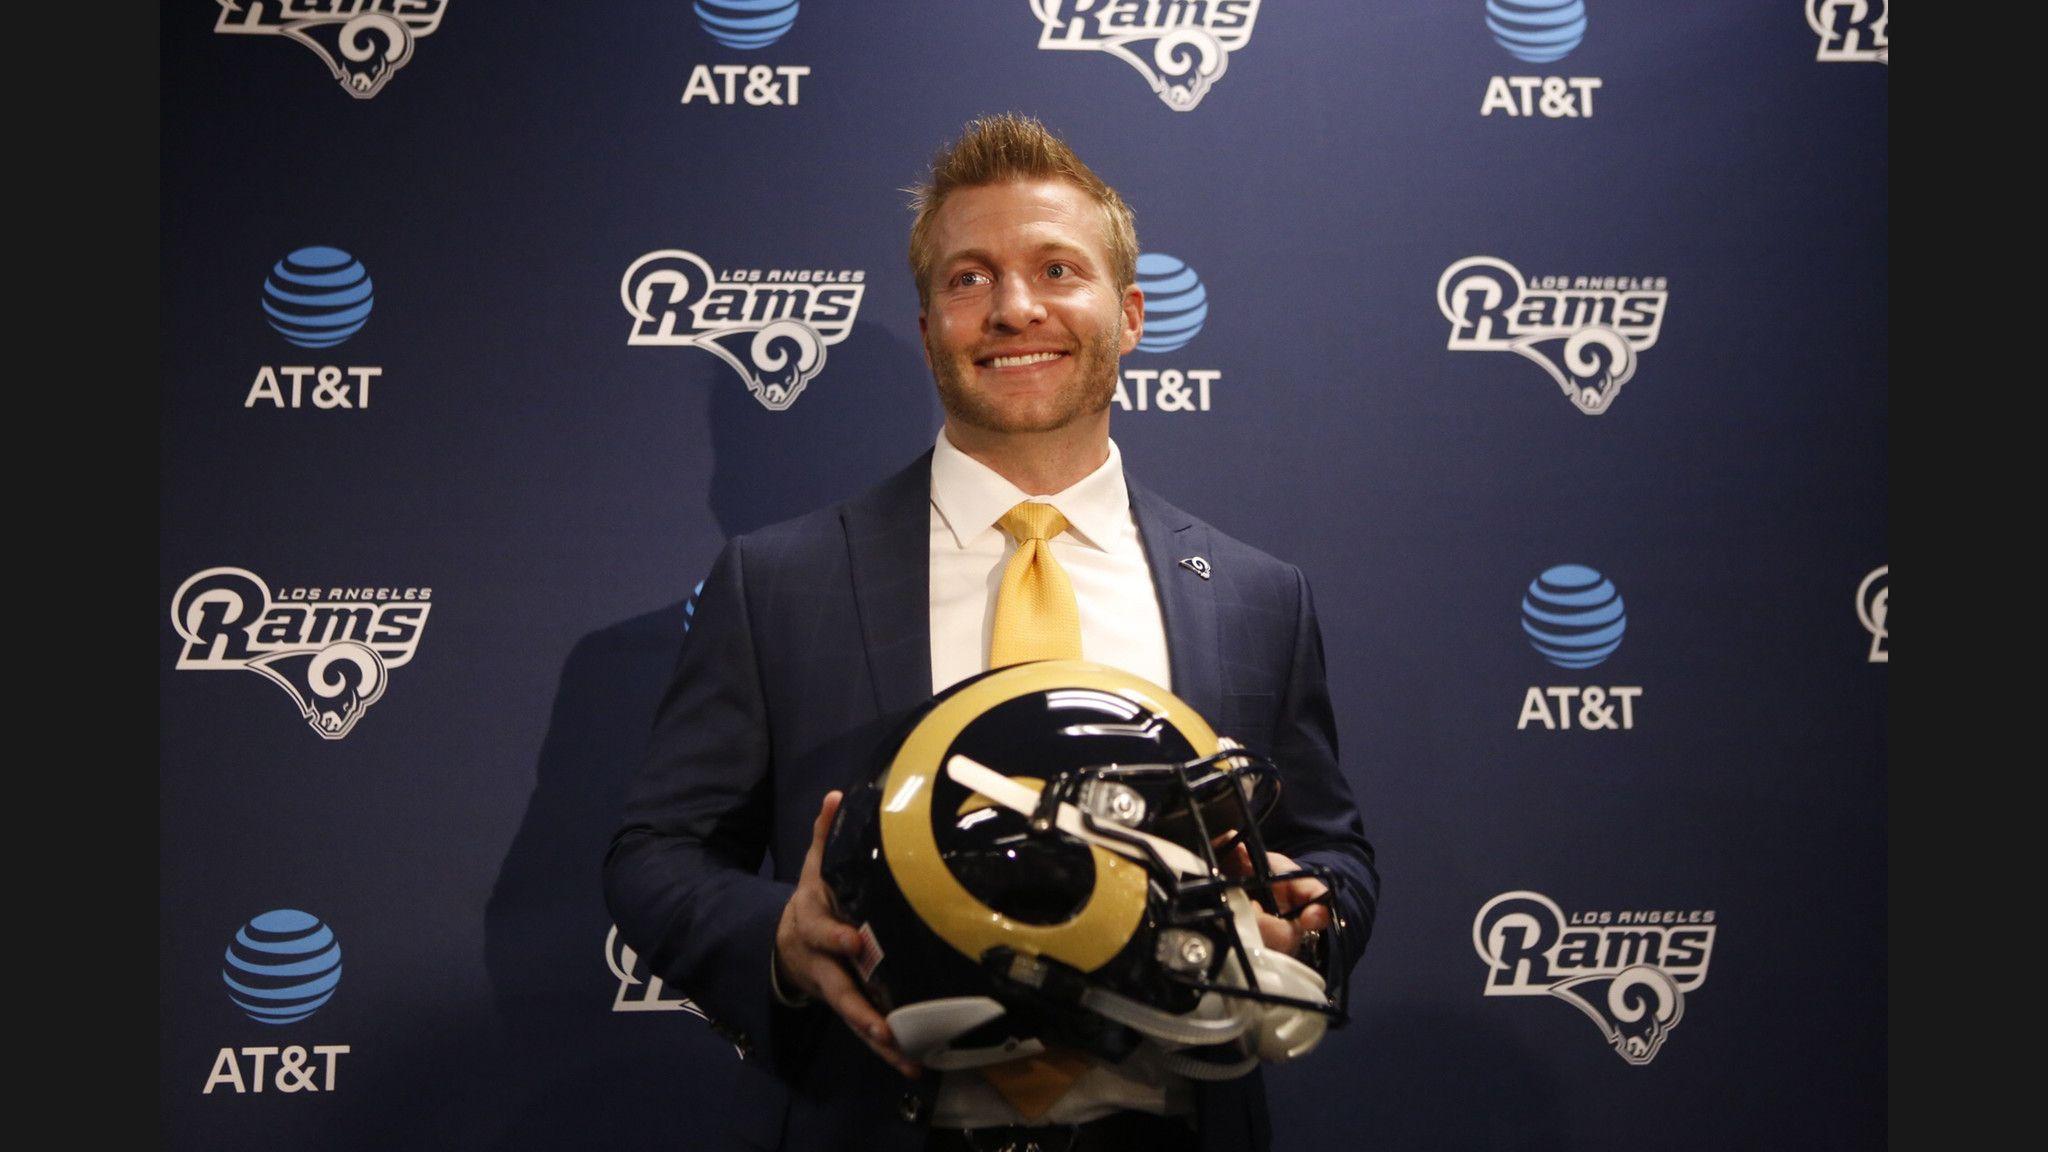 Sean McVay is introduced as the Rams' new coach